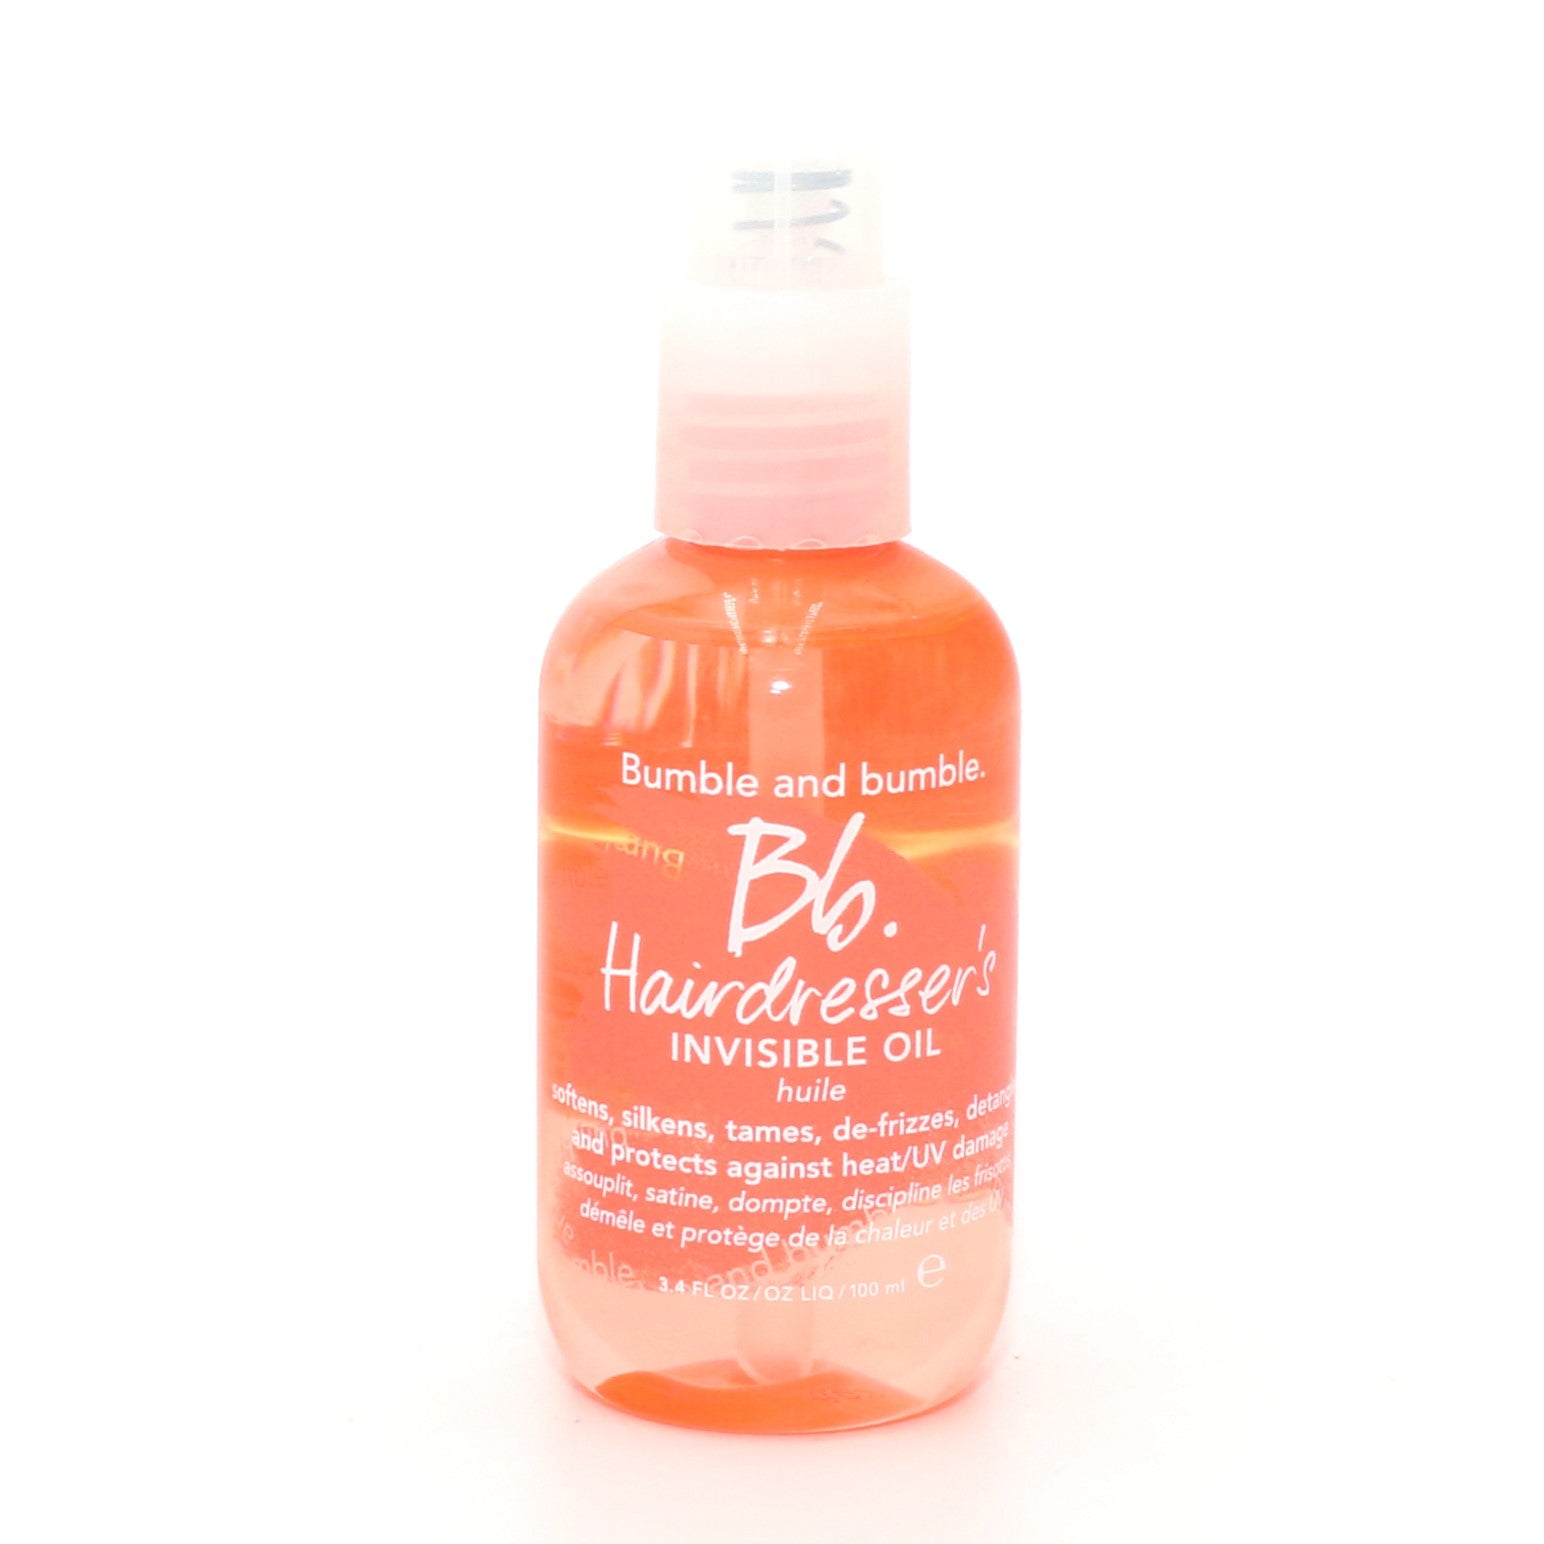 Bumble and Bumble Hairdresser's Invisible Oil 3.4 oz